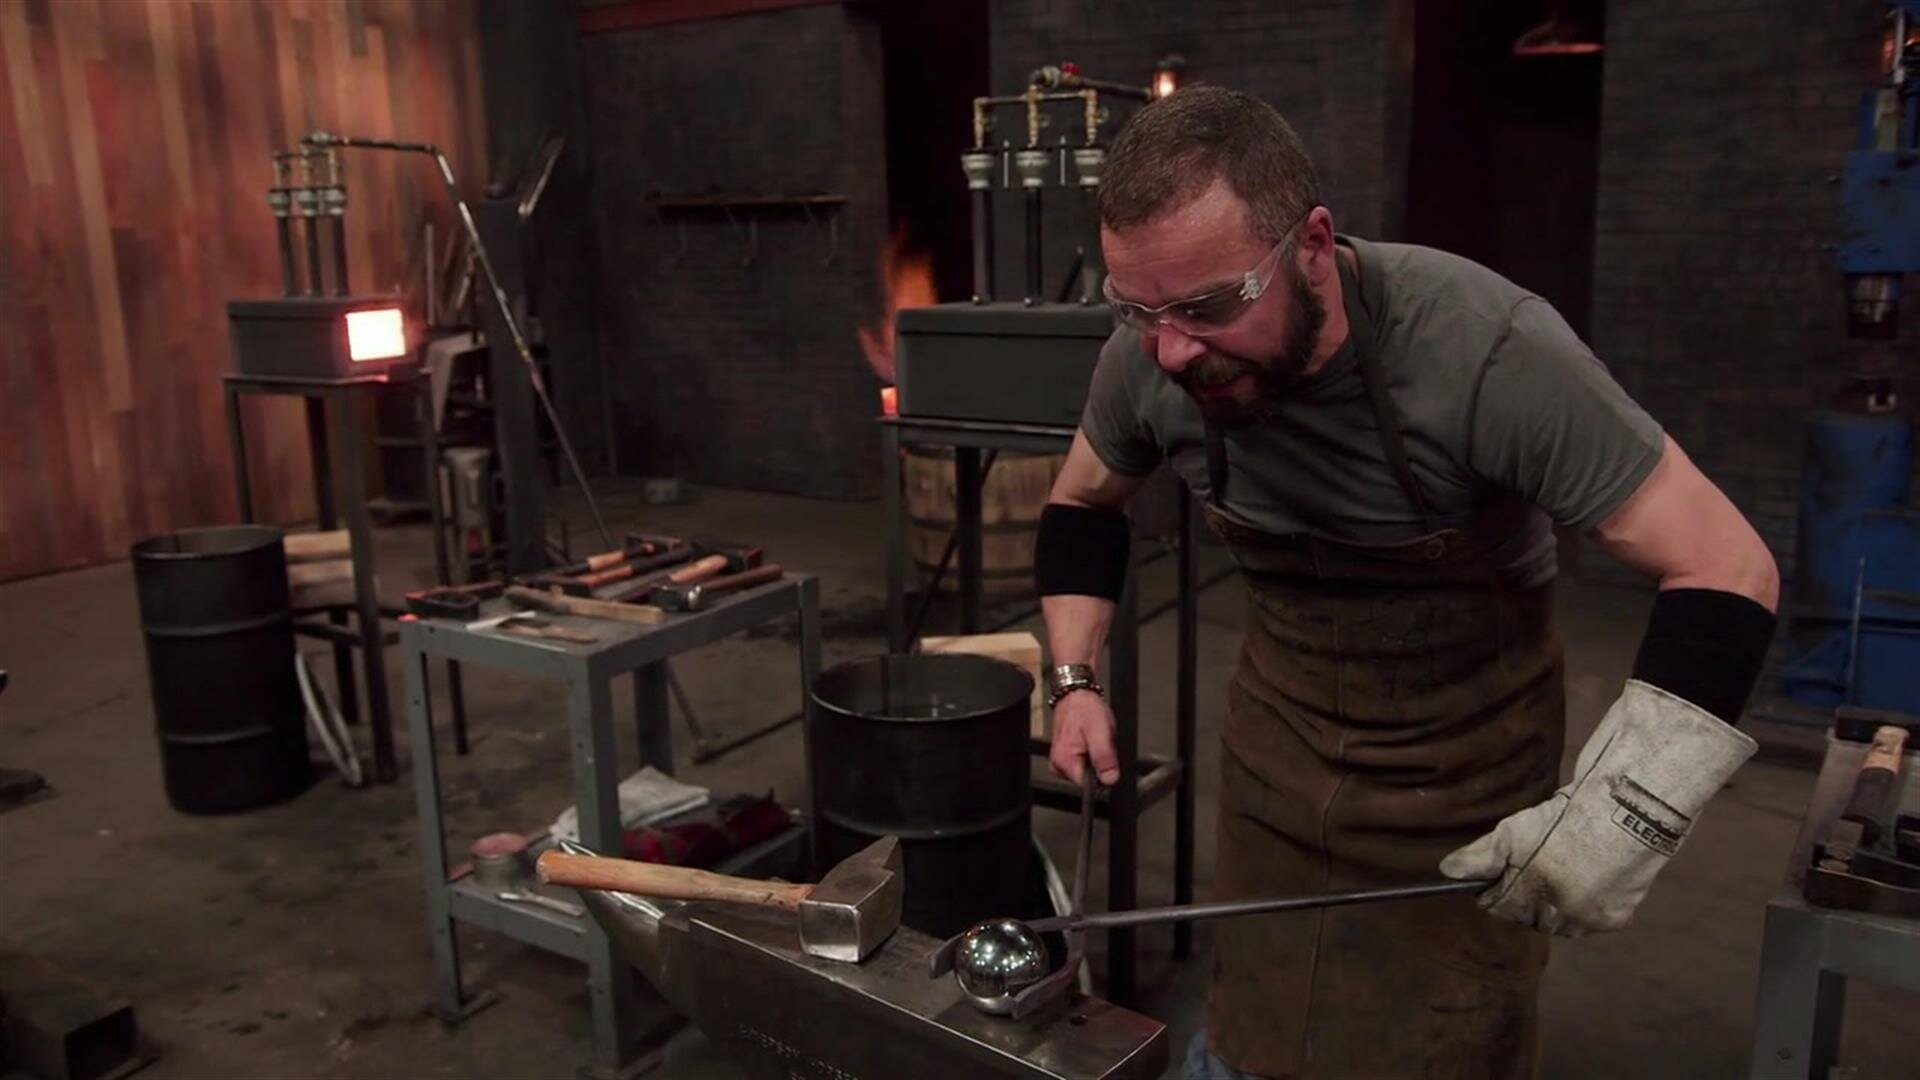 forged in fire season 6 episode 20